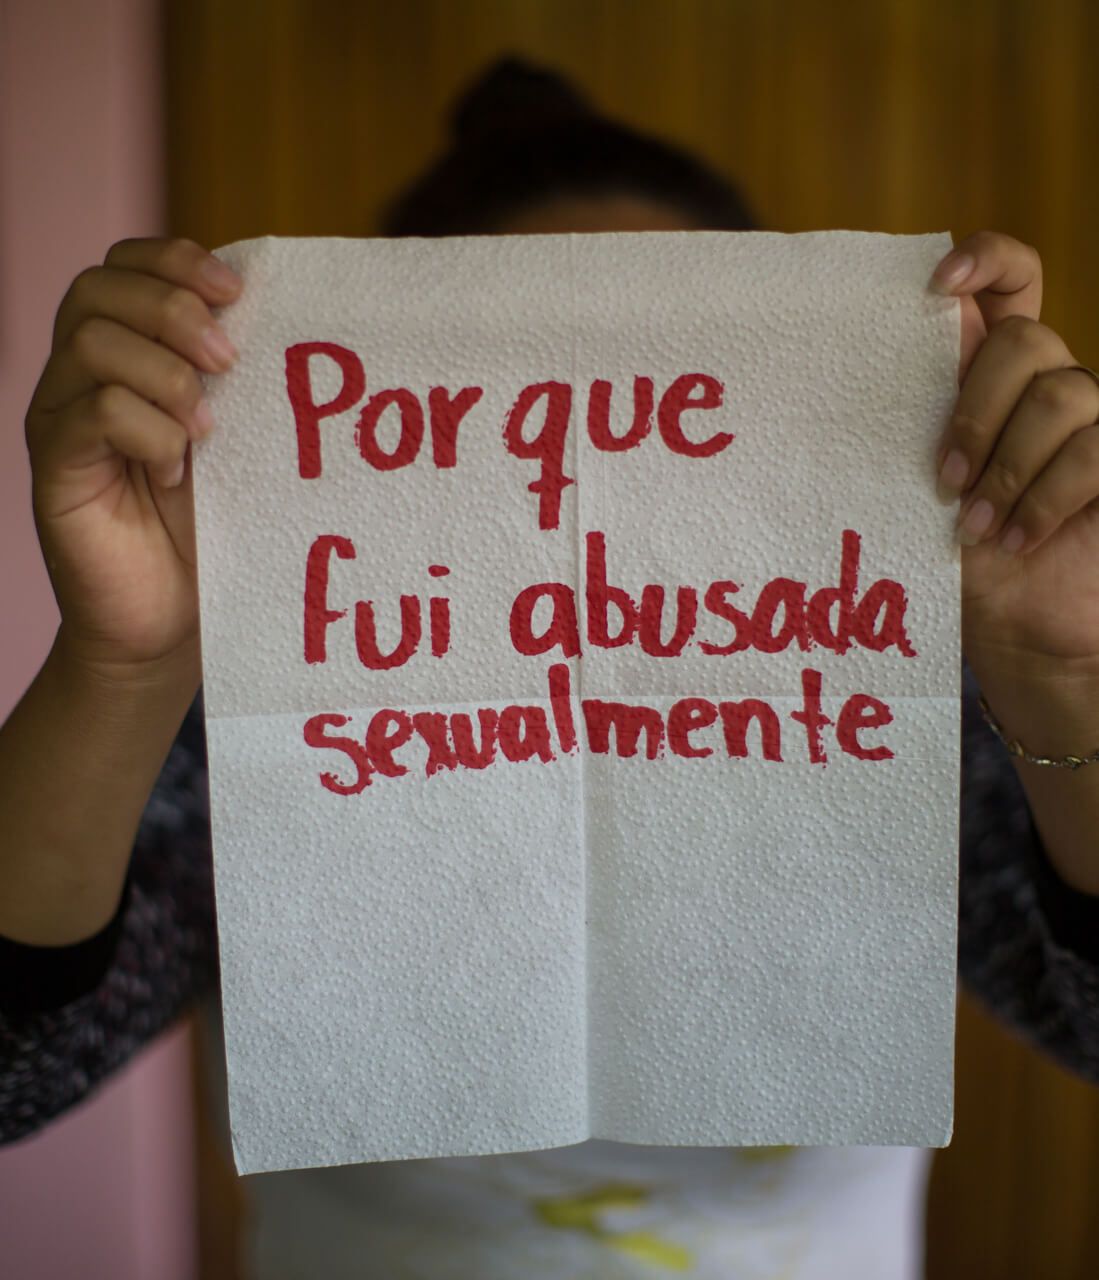 Saraí, 17.

The napkin reads: "because I was sexually abused." She's unable to forget her stepfather, who fondled her when she was only five years old. Saraí started working as a street vendor in buses when she was 7. And the abuse changed. sometimes her grandmother hit her so hard with cables or pieces of wood that her skin showed marks. Even so, now she helps younger children.

Image by Almudena Toral. El Salvador, 2018.